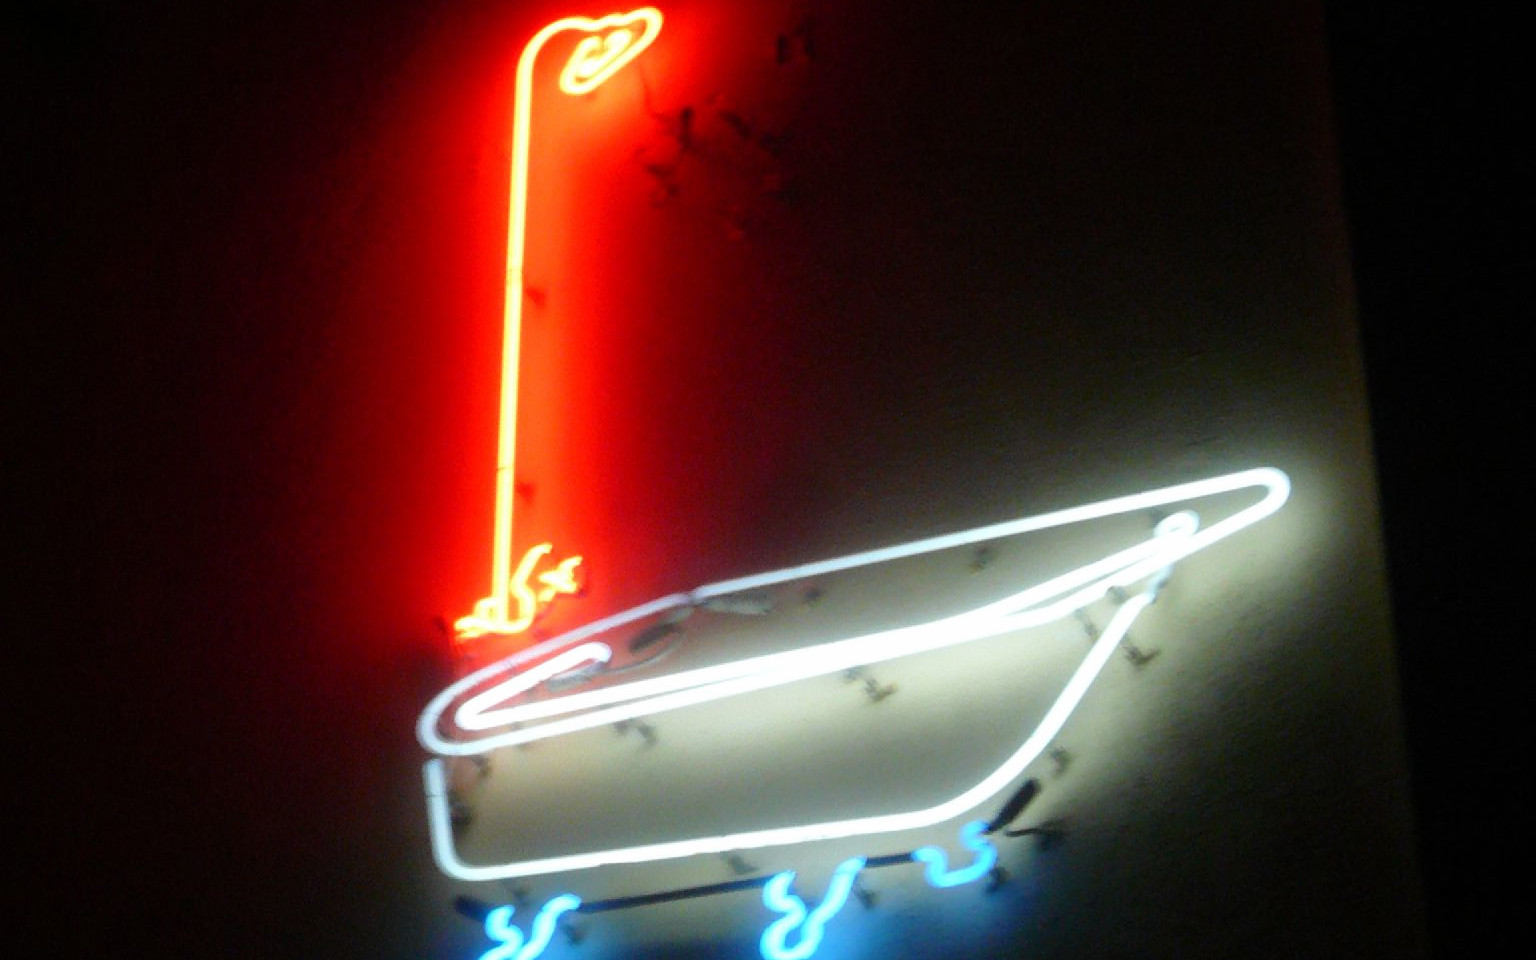 Image: A neon sign of a bathtub.